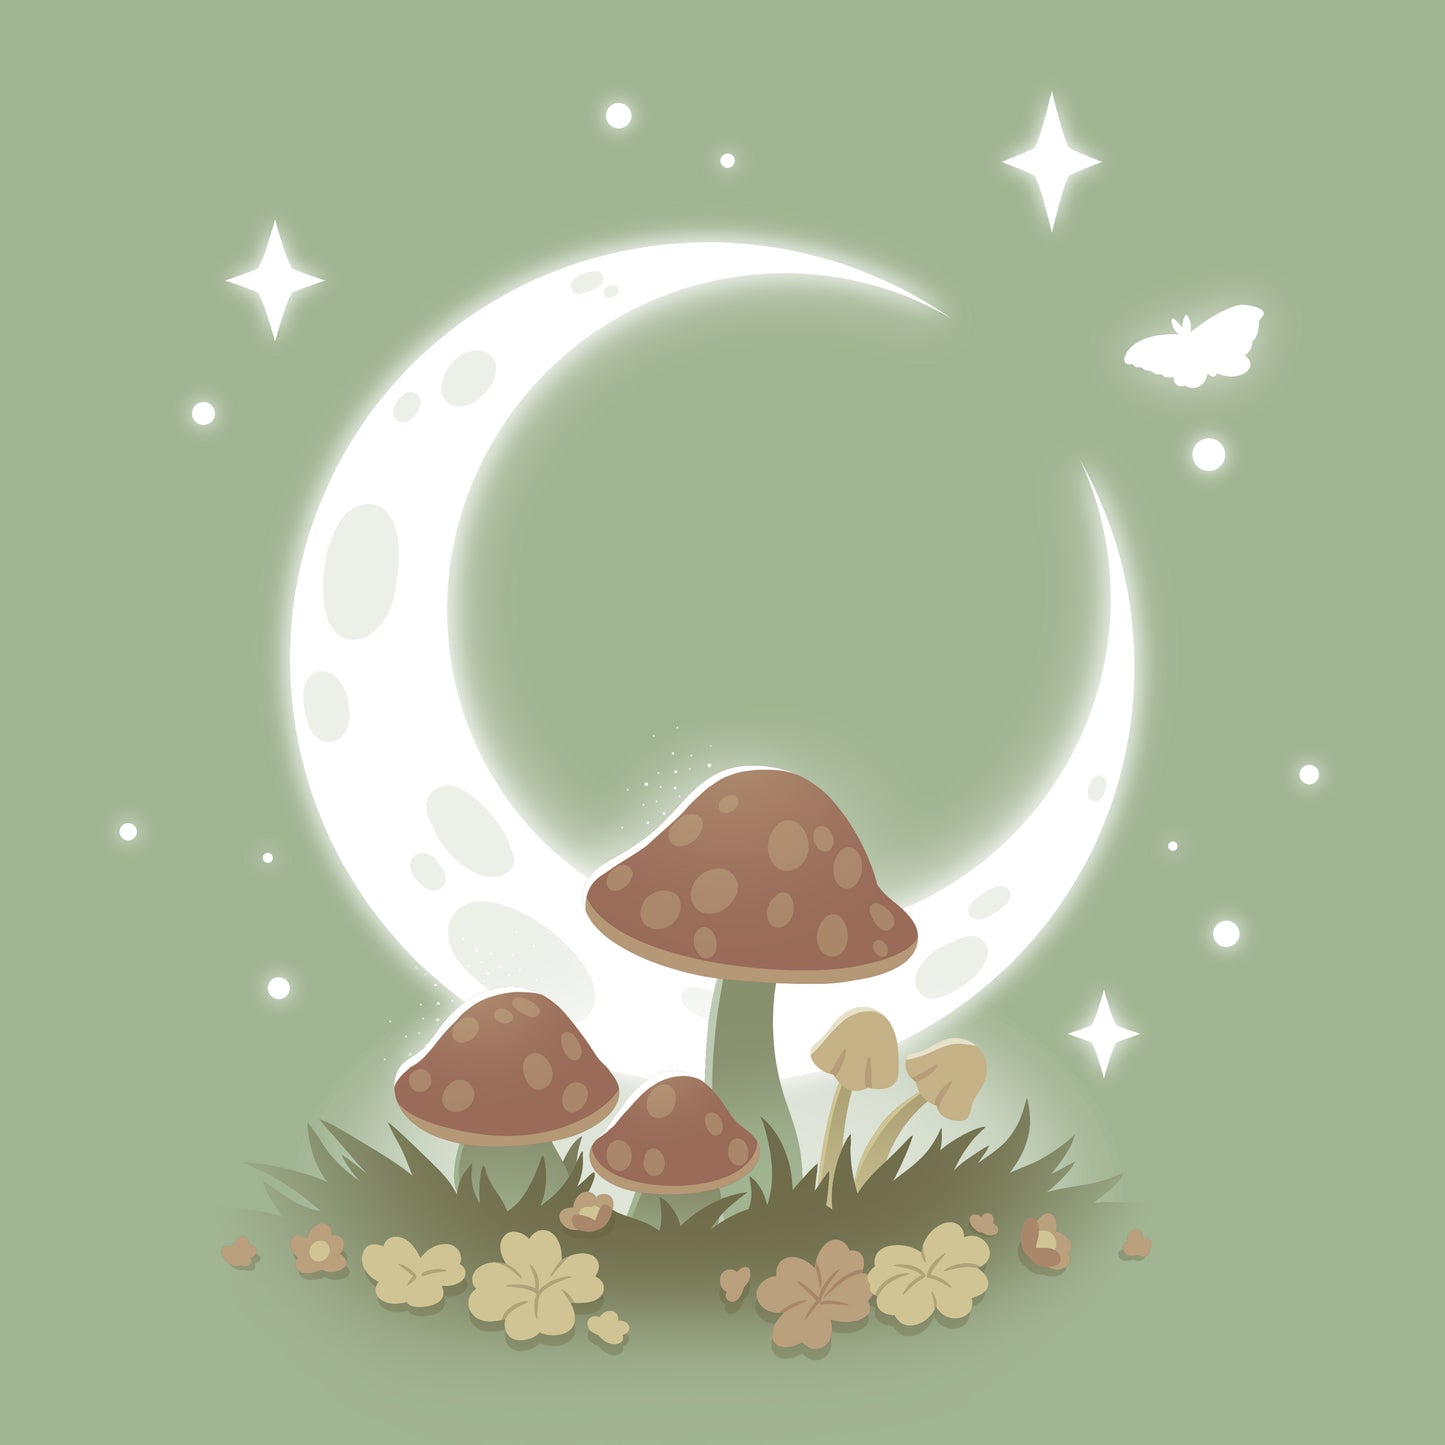 A cottagecore-inspired scene with a moon, TeeTurtle wild mushrooms, and sage on green grass.